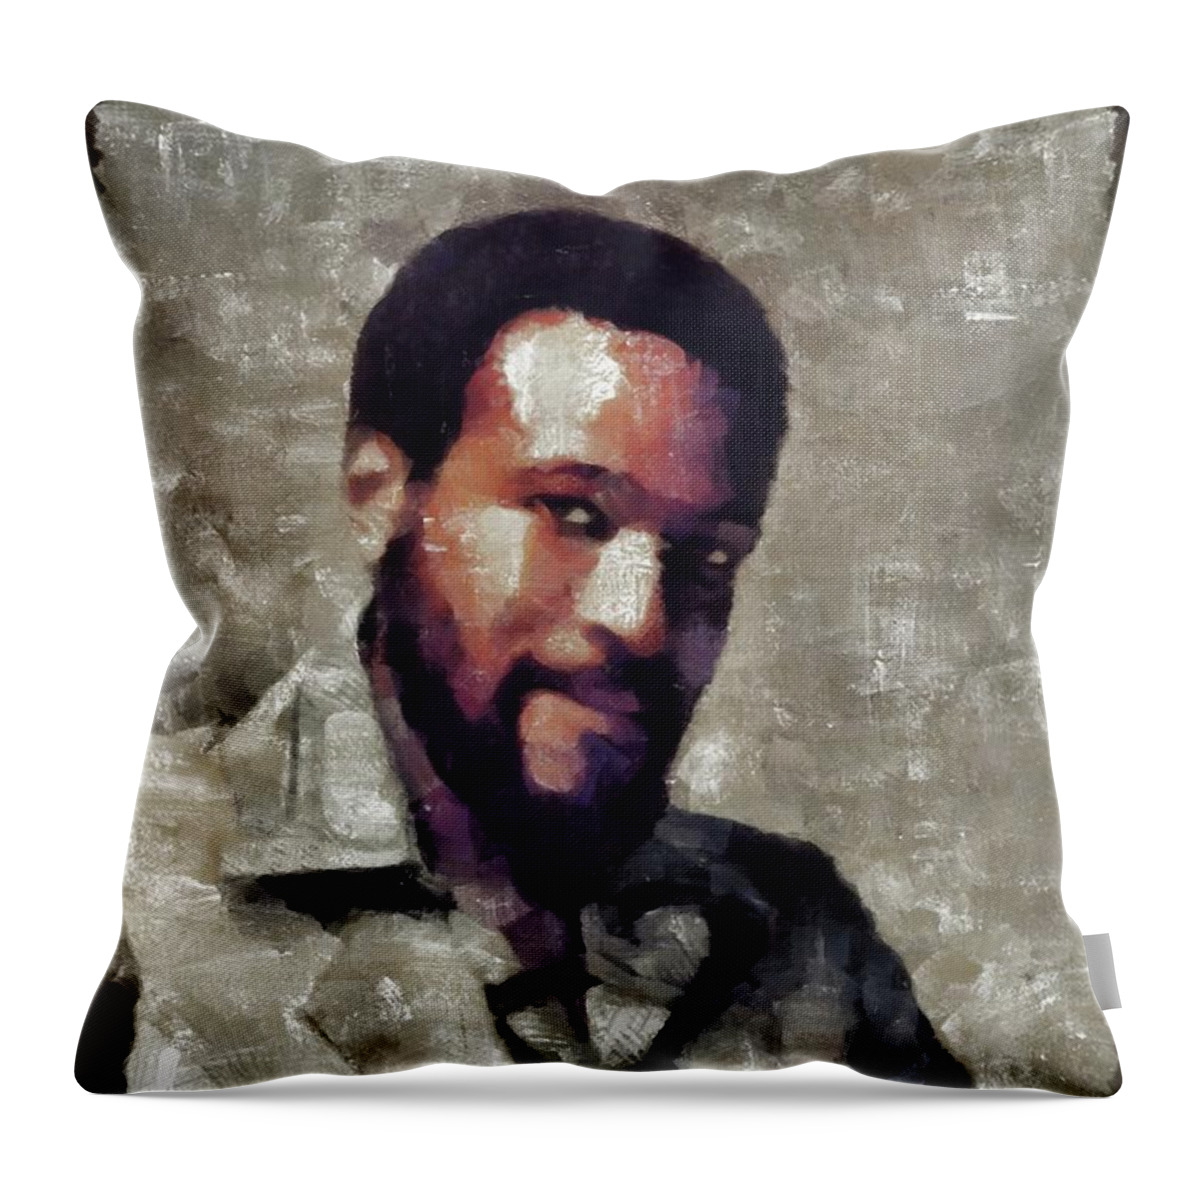 Marvin Throw Pillow featuring the painting Marvin Gaye, Music Legend by Esoterica Art Agency